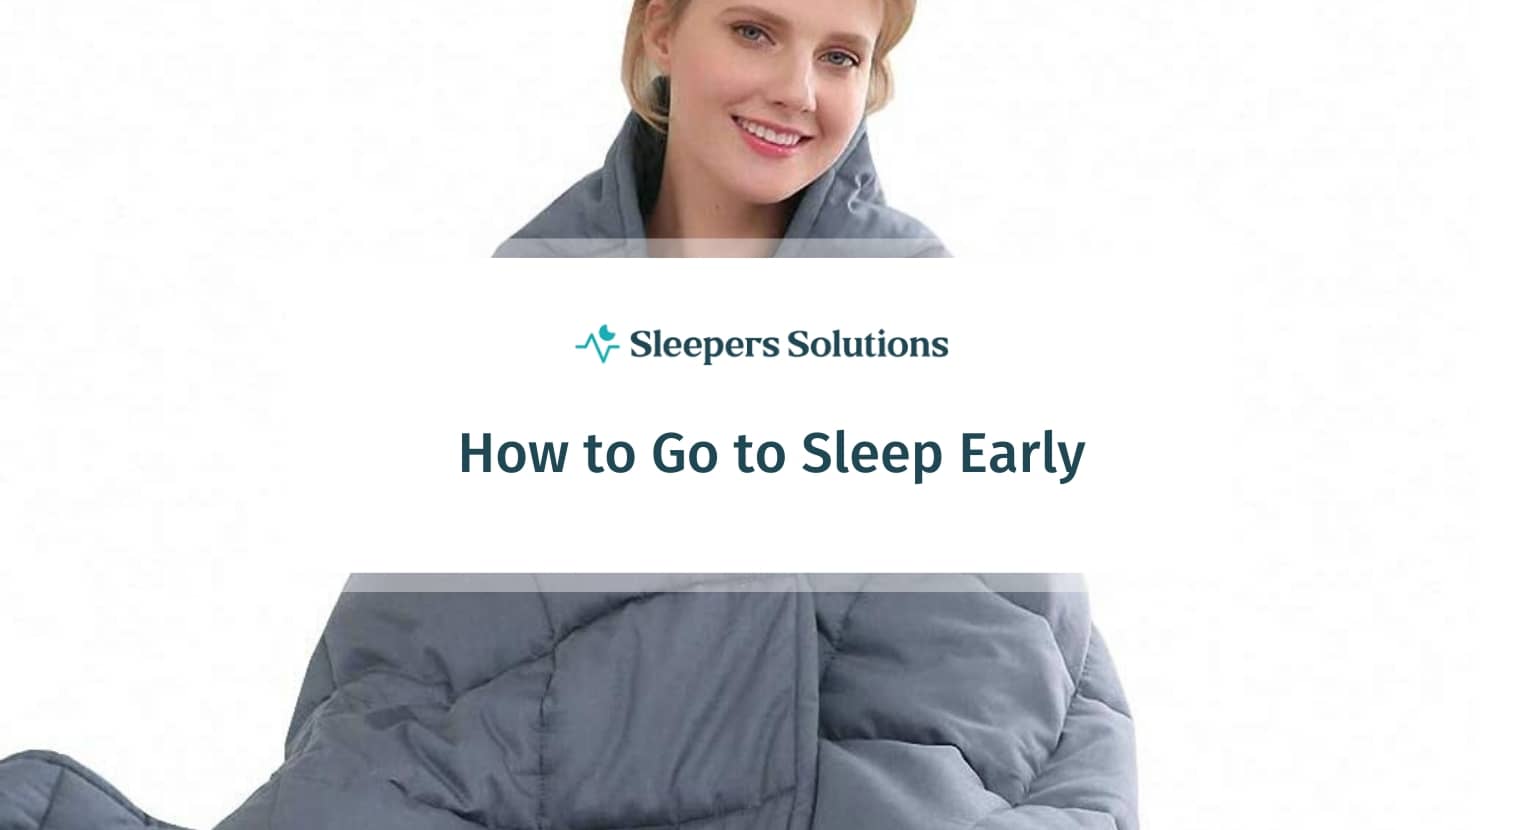 How to Go to Sleep Early